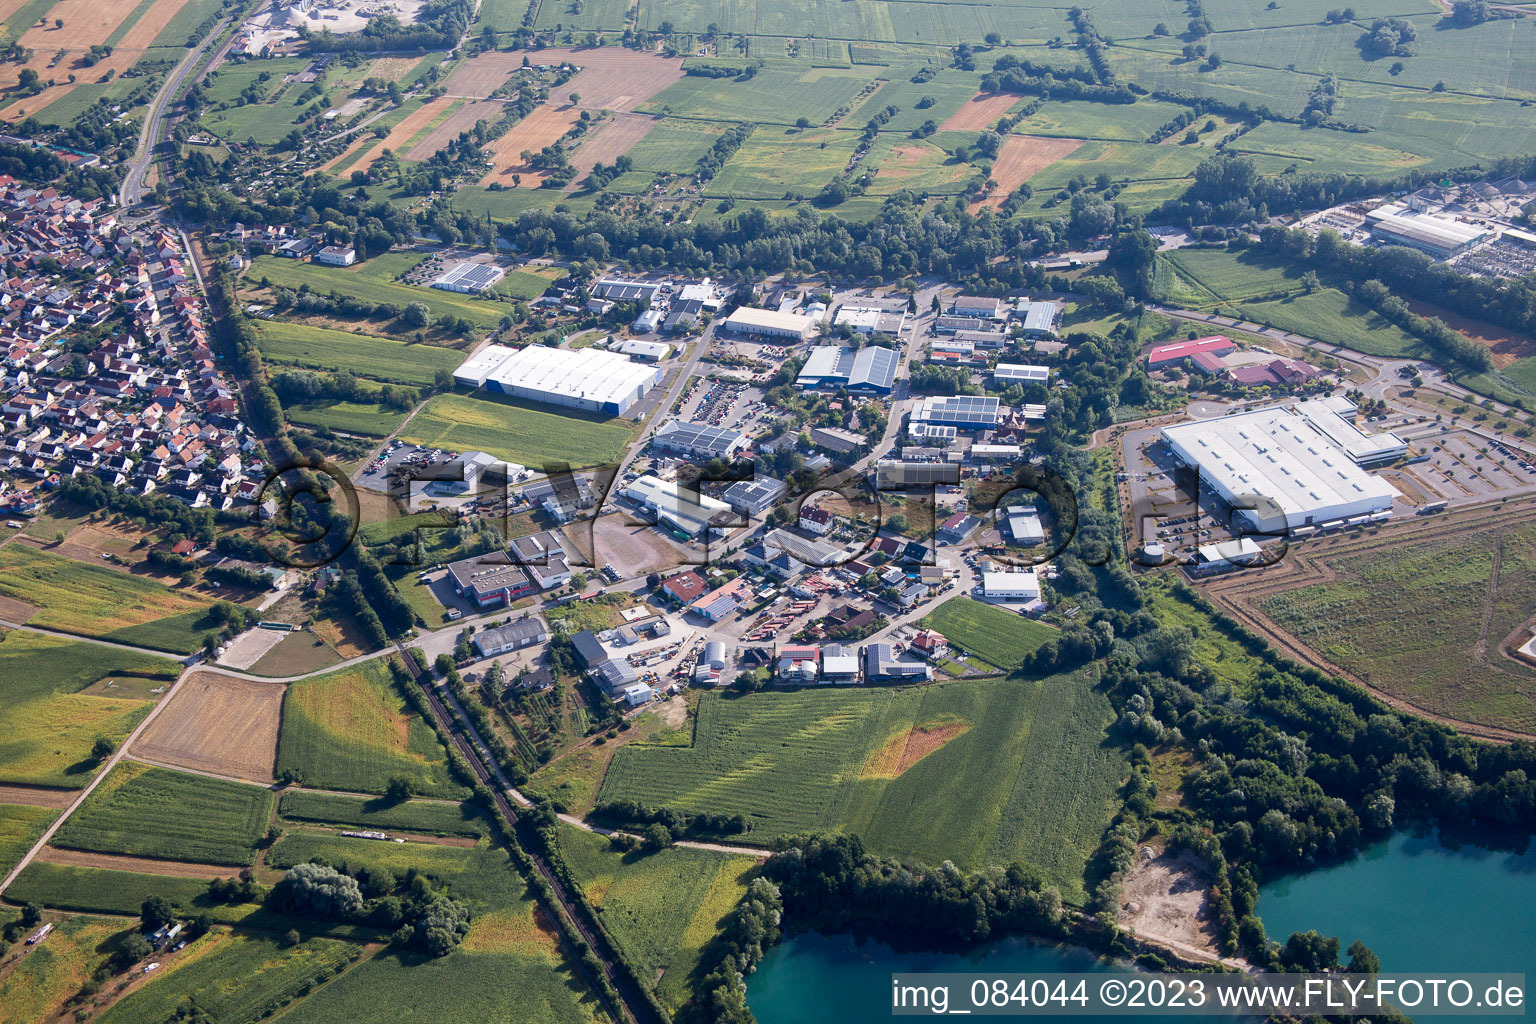 Aerial view of Industrial area in Hagenbach in the state Rhineland-Palatinate, Germany